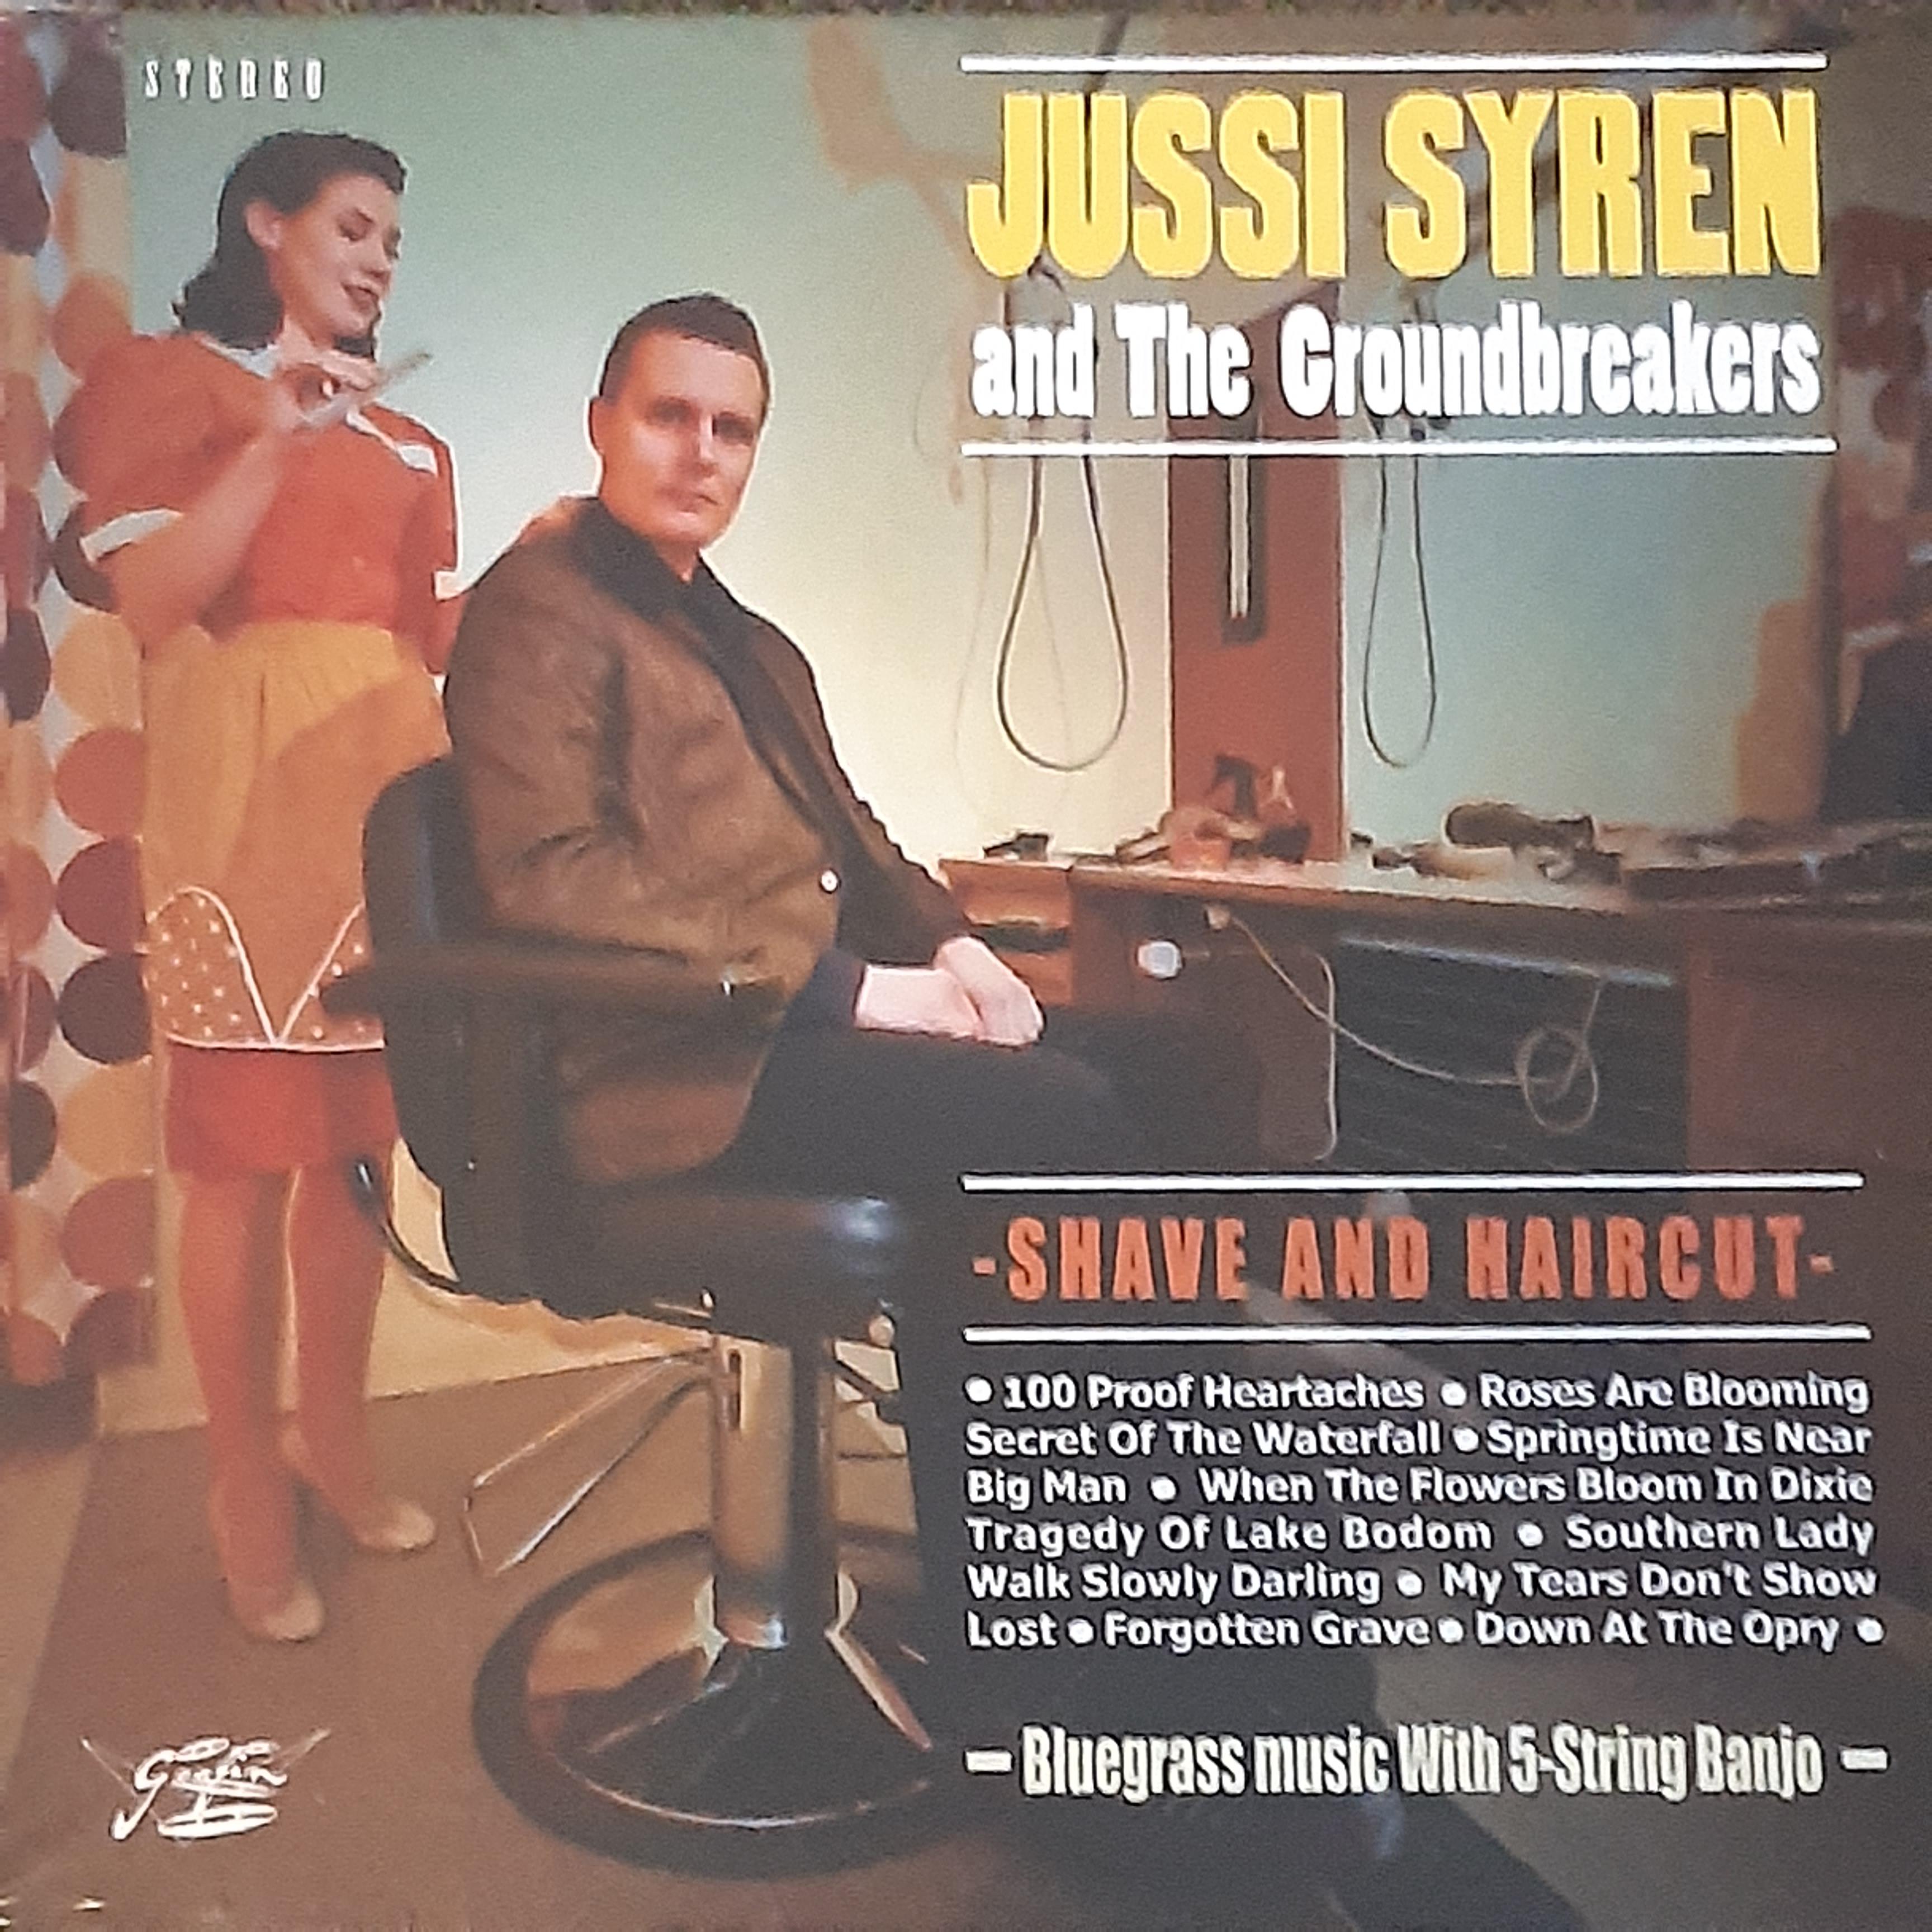 Jussi Syren And The Groundbreakers - Shave And Haircut - CD (uusi)